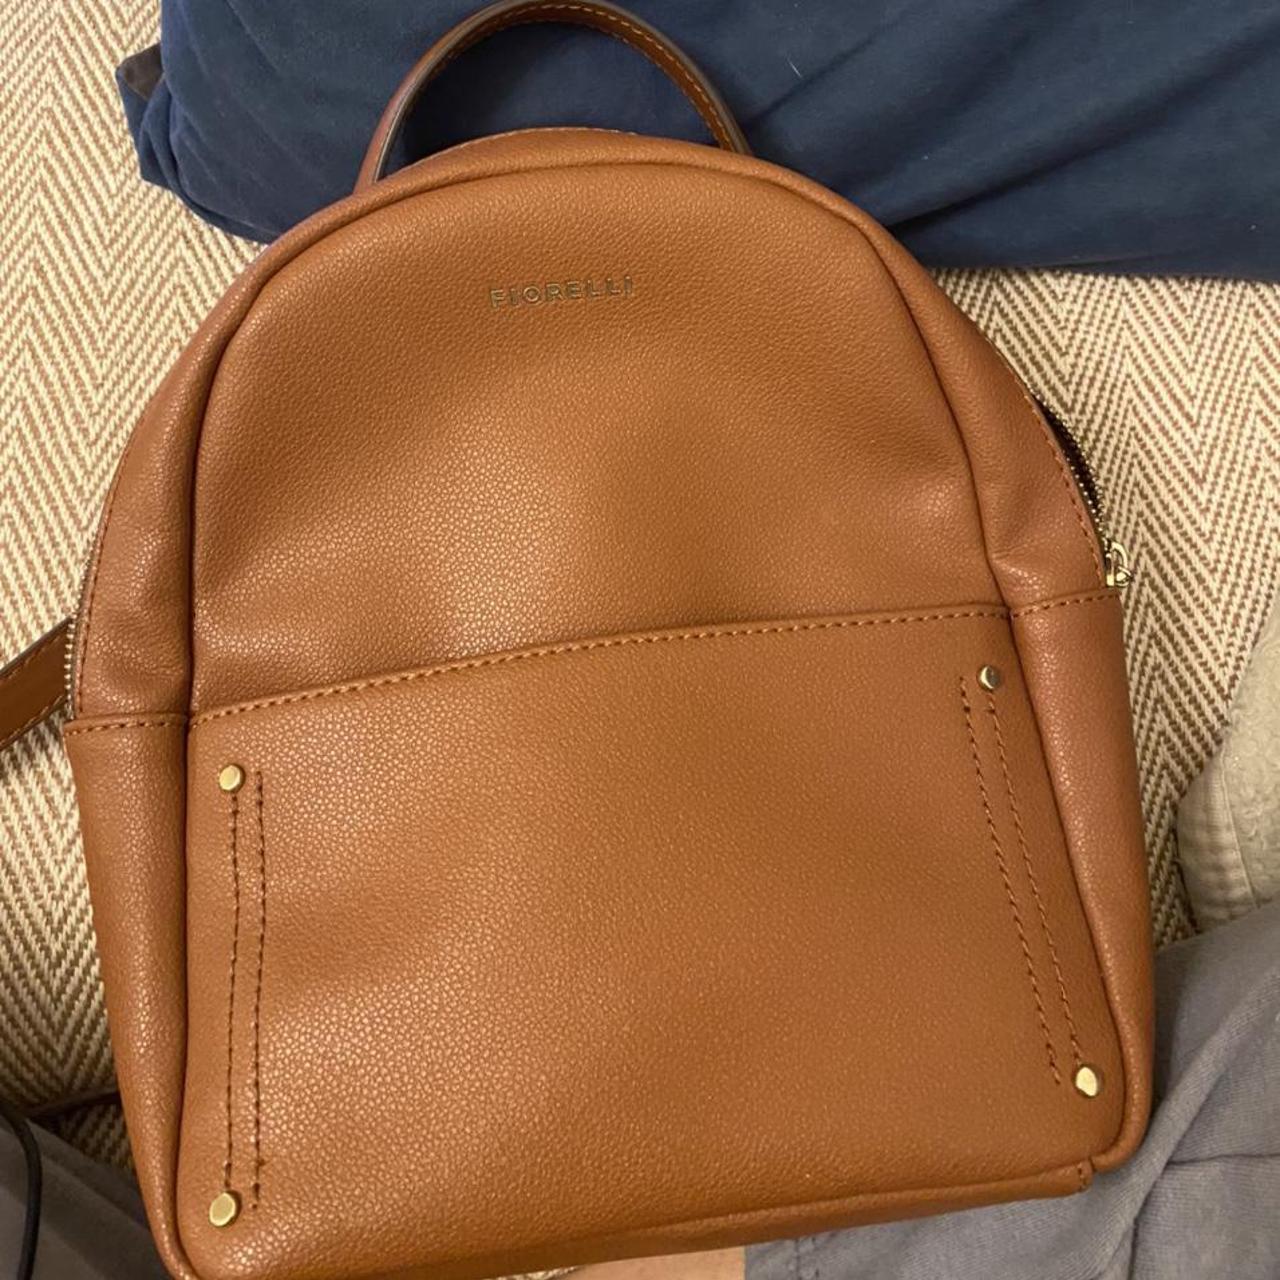 Product Image 1 - Fiorelli backpack, love this bag